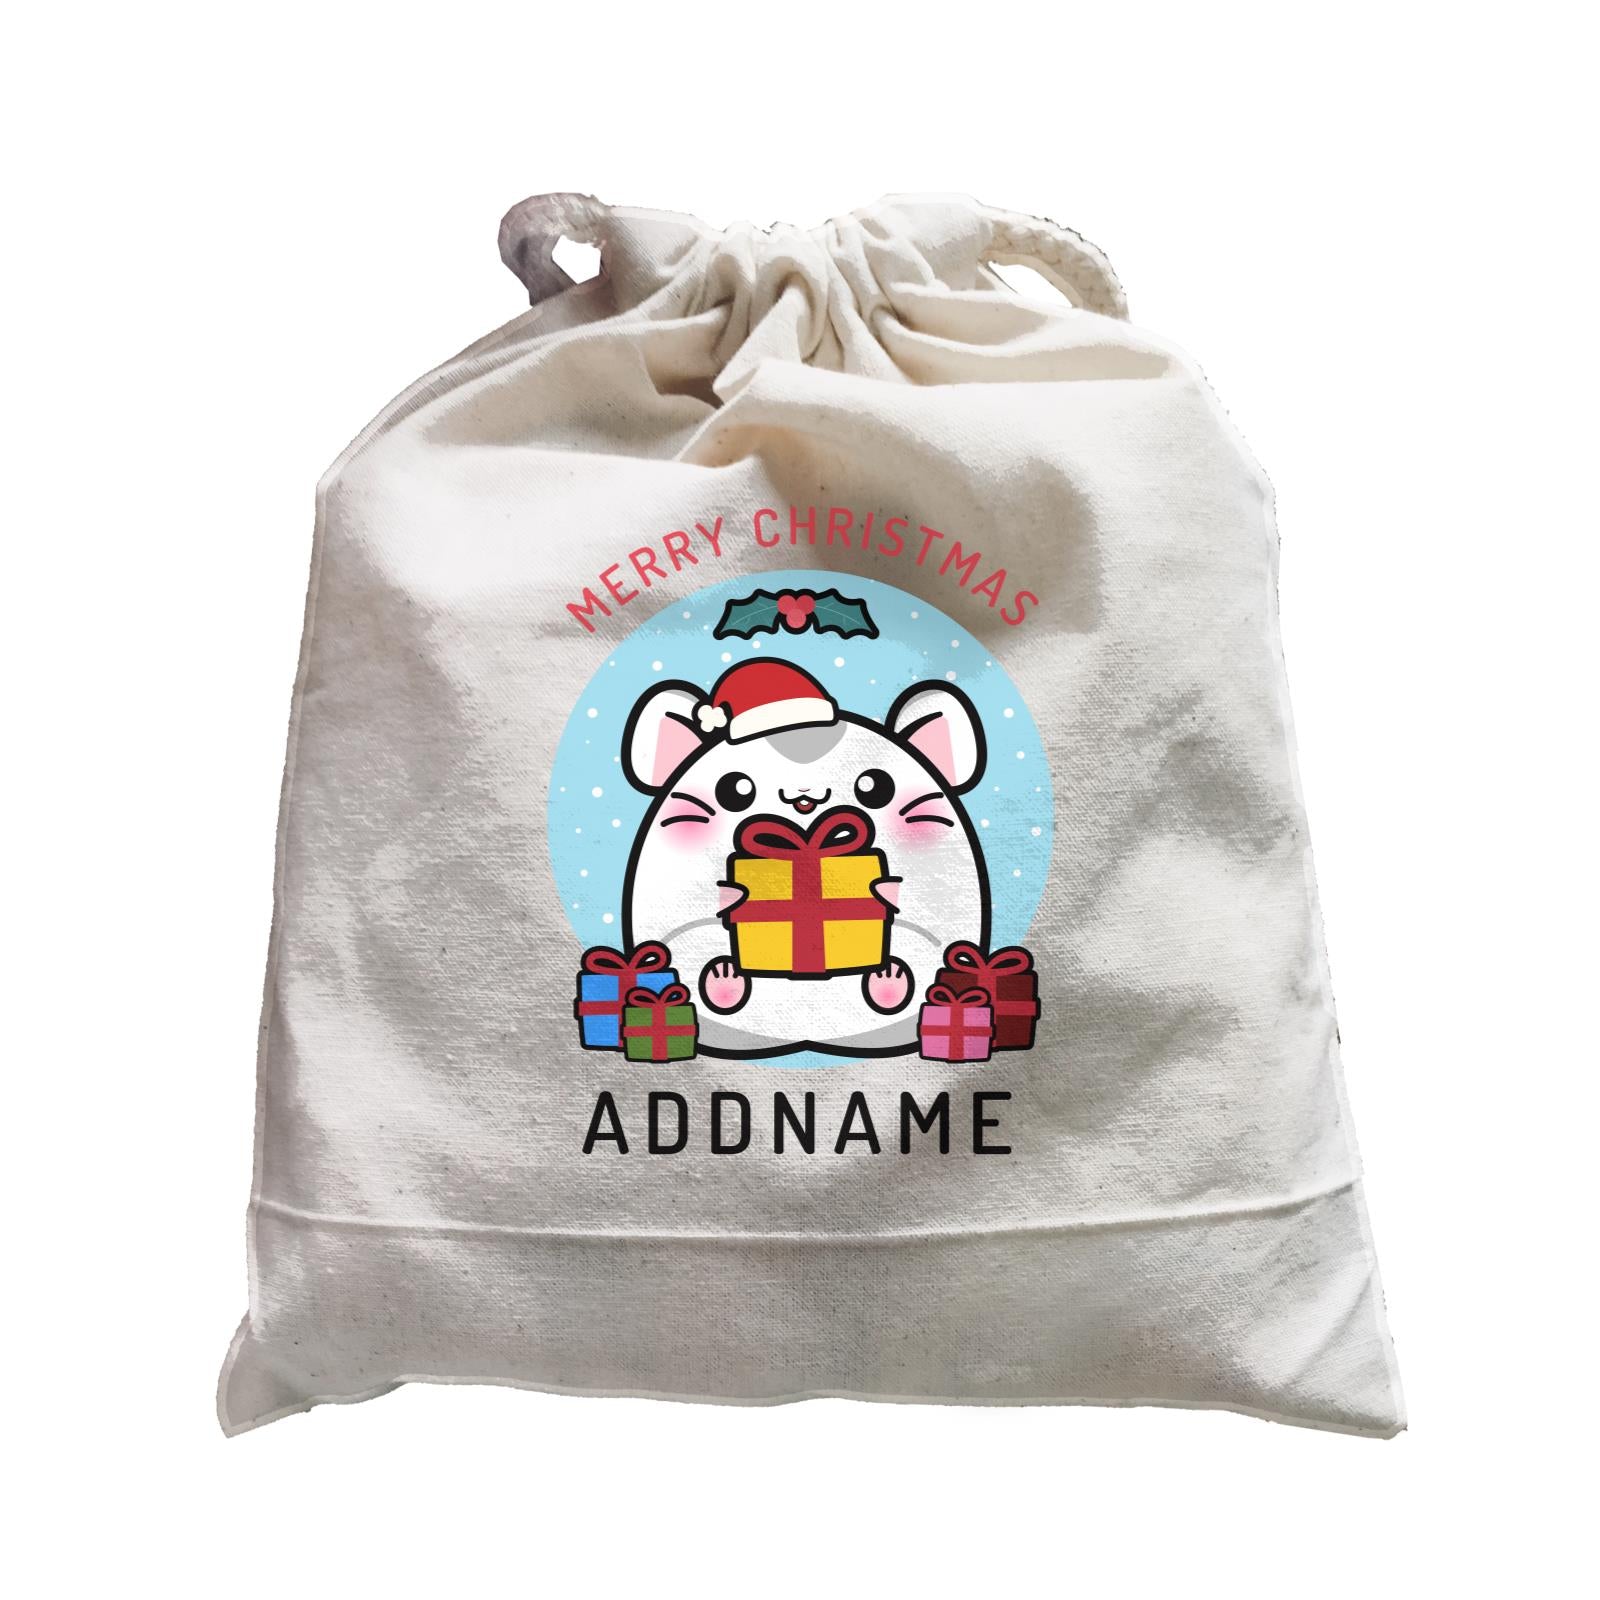 Merry Christmas Cute Santa Boy Hamster with Gifts Satchel